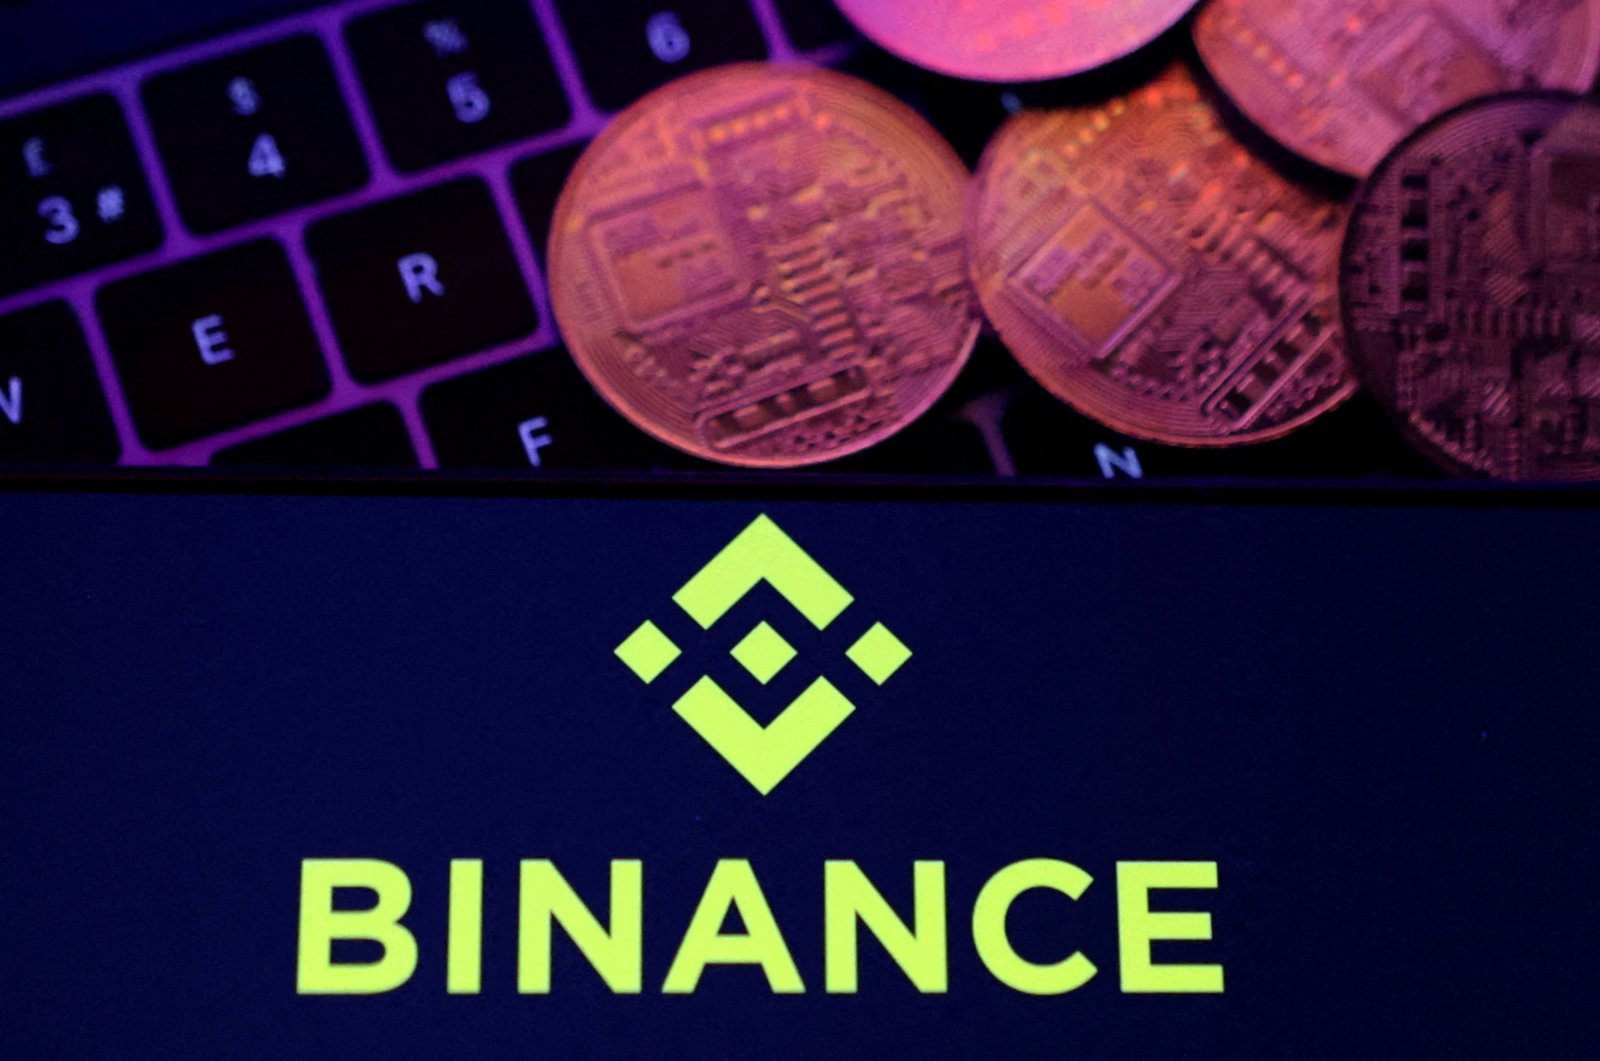 A smartphone displaying the Binance logo and a representation of cryptocurrencies on a keyboard are seen in this illustration, Nov. 8, 2022. (Reuters Photo)